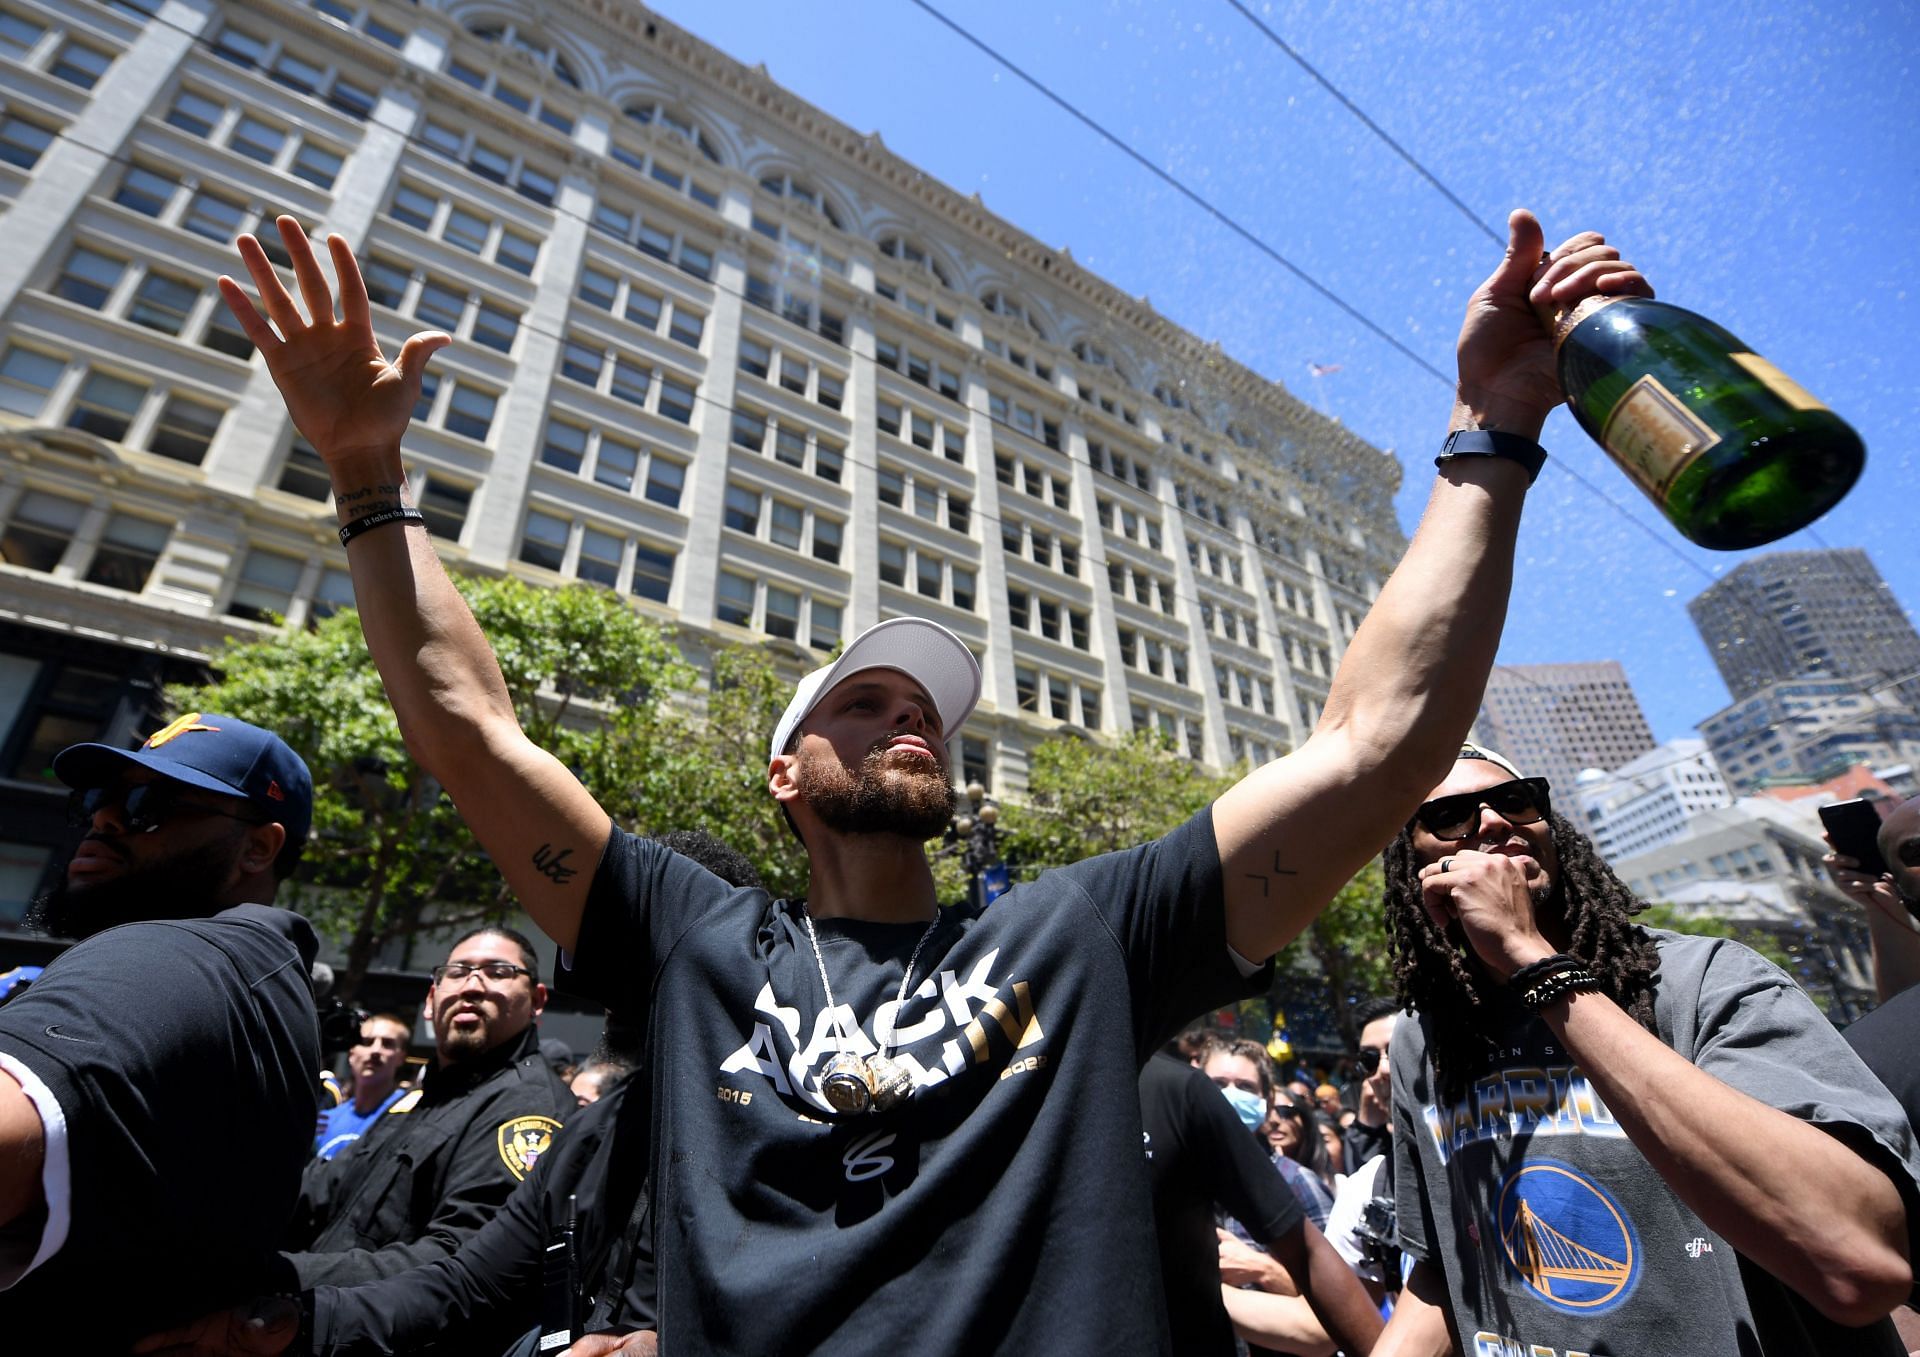 Stephen Curry of the Golden State Warriors celebrates during a victory parade on Monday in San Francisco, California.